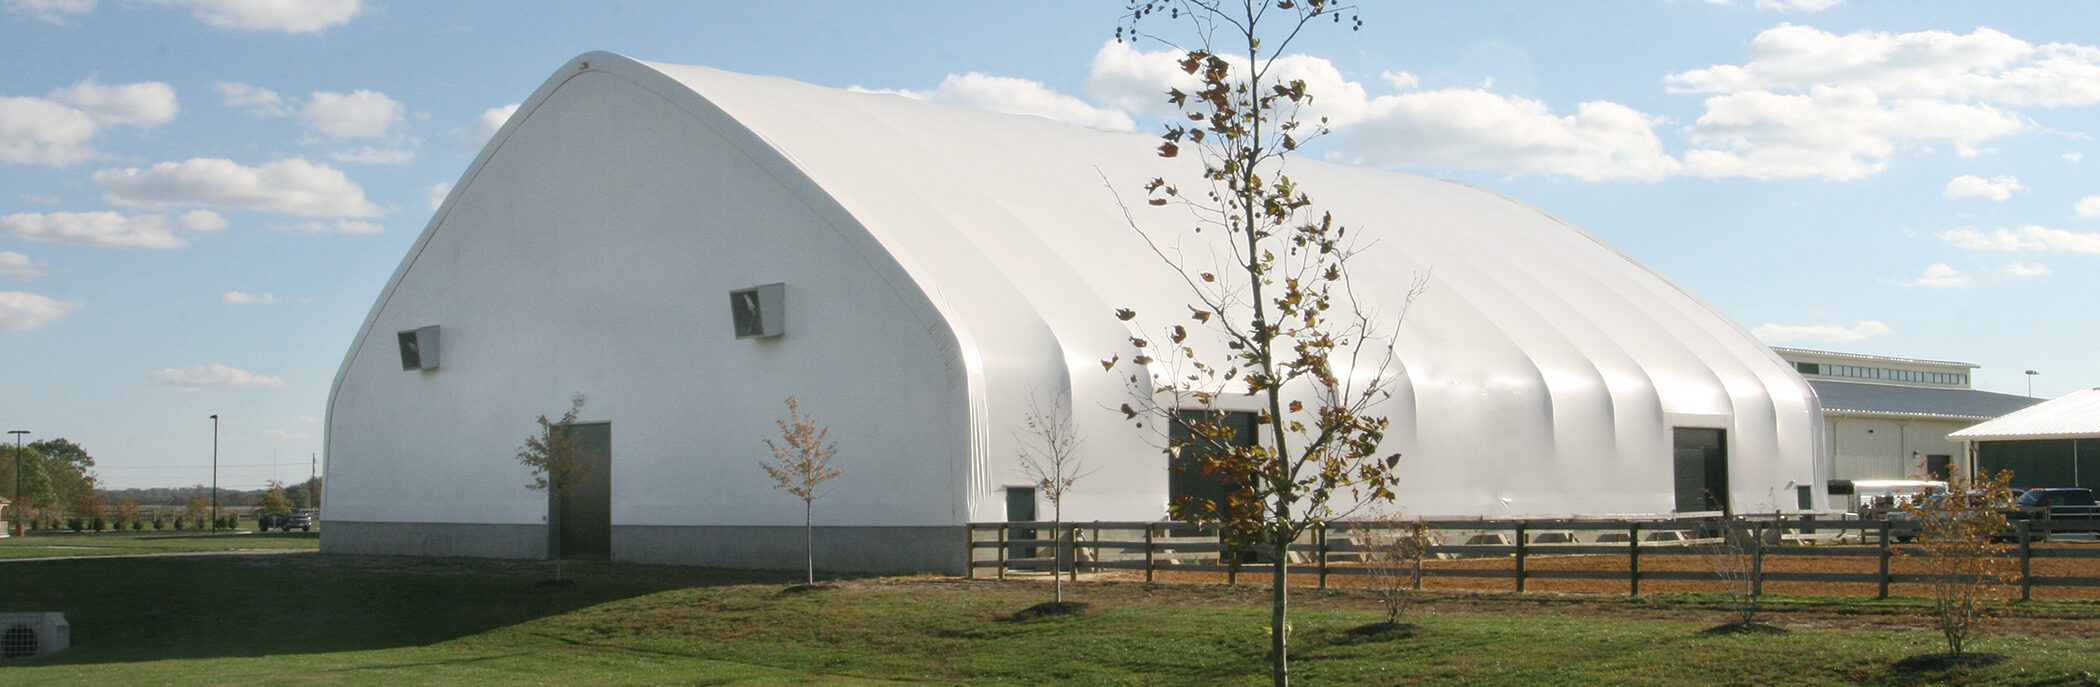 fabric structure with wood fencing on the outside